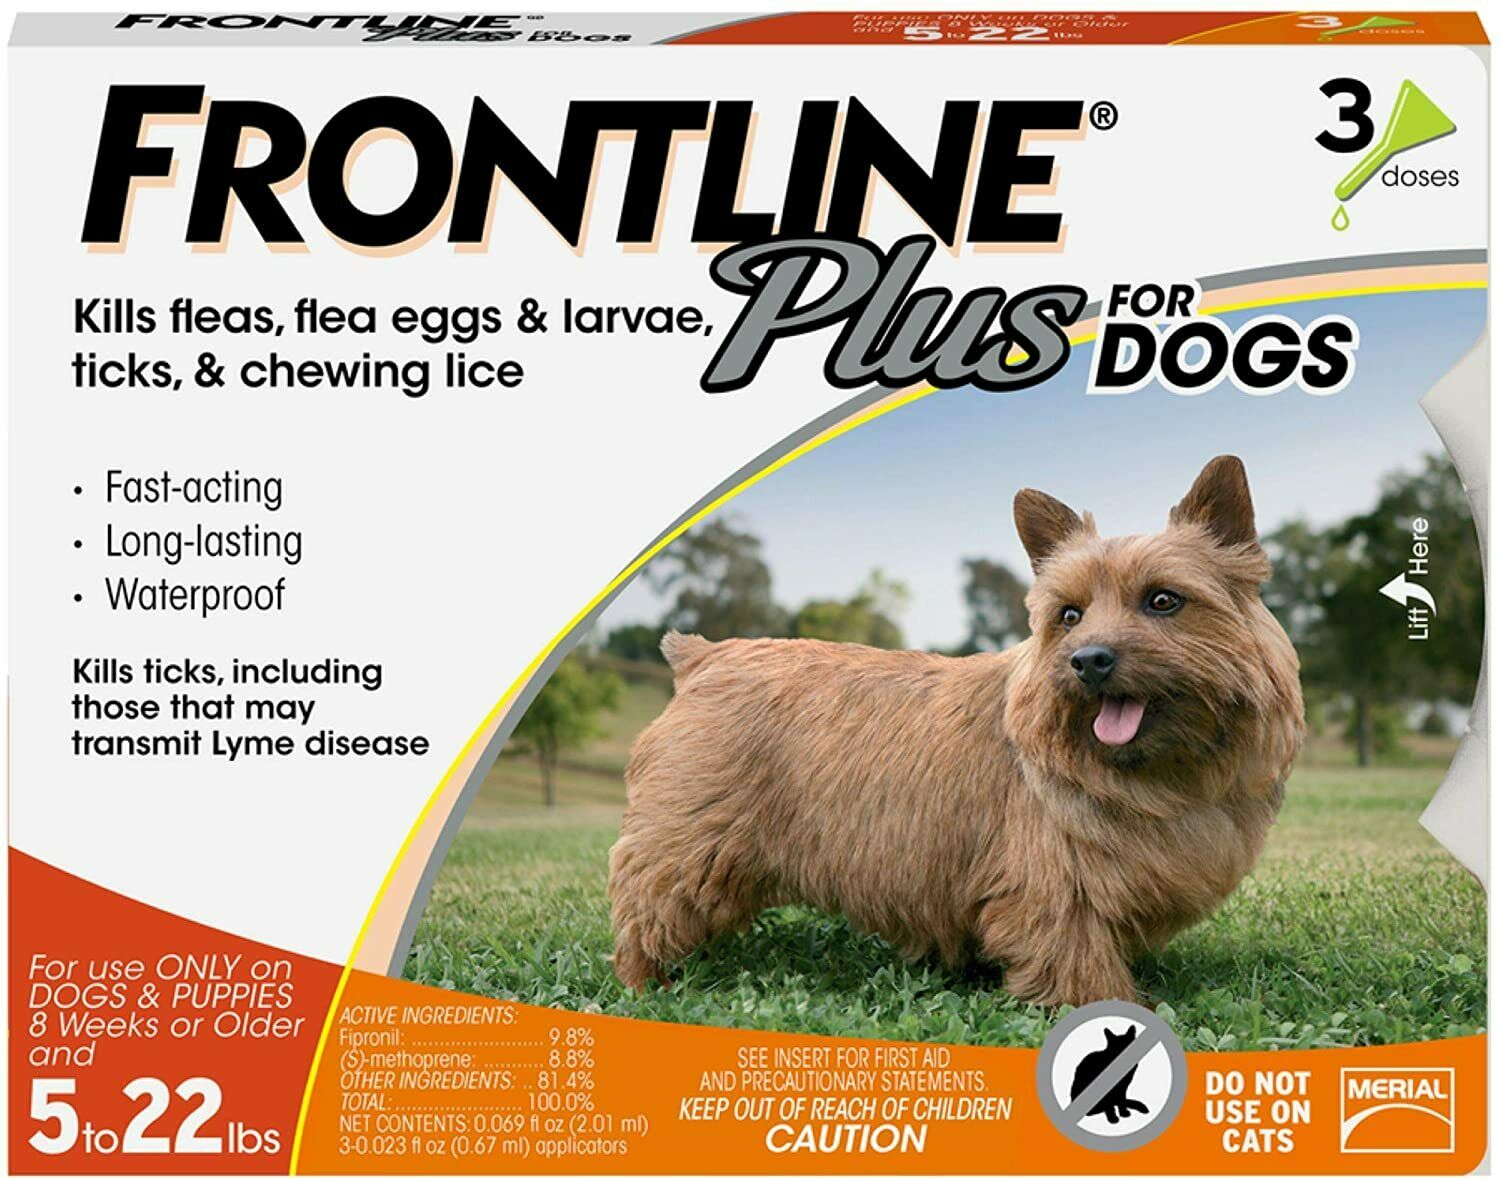 Frontline Plus For Small Dogs 5-22 Lbs. Orange Box 3 Month Supply - Epa Approved